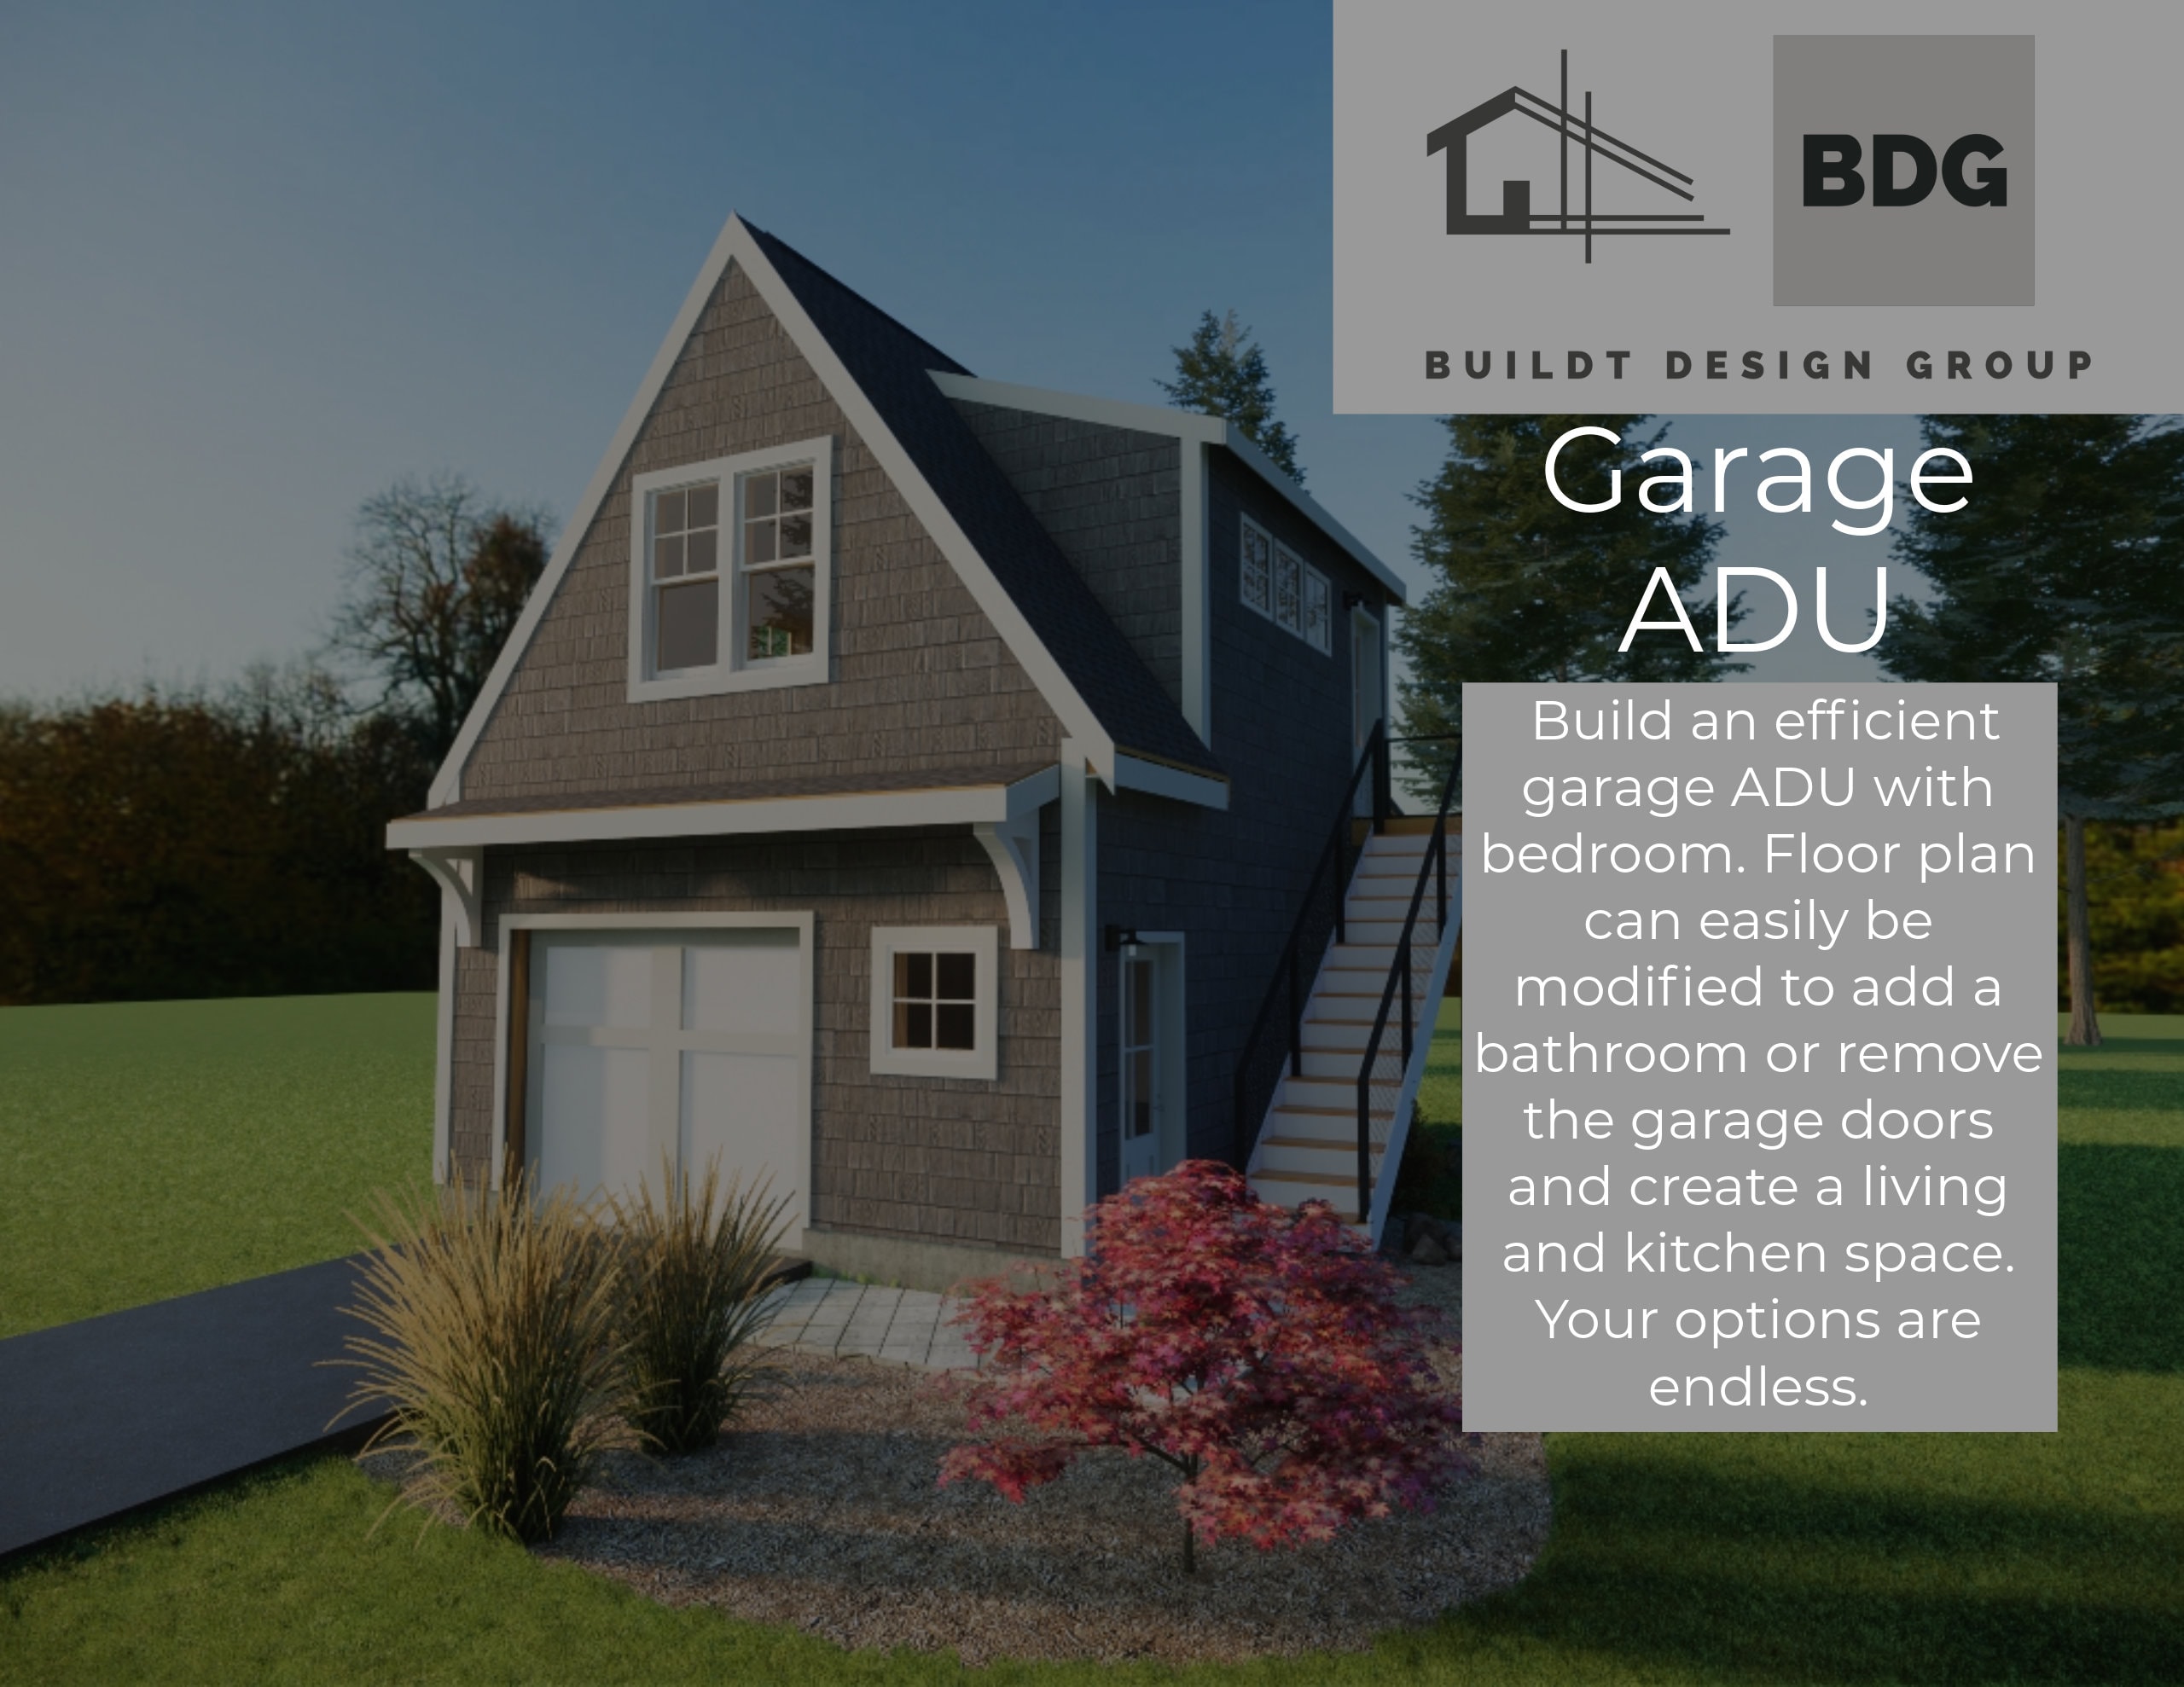 Garage ADU Floor Plan With Bedroom and Exterior Stair - Etsy